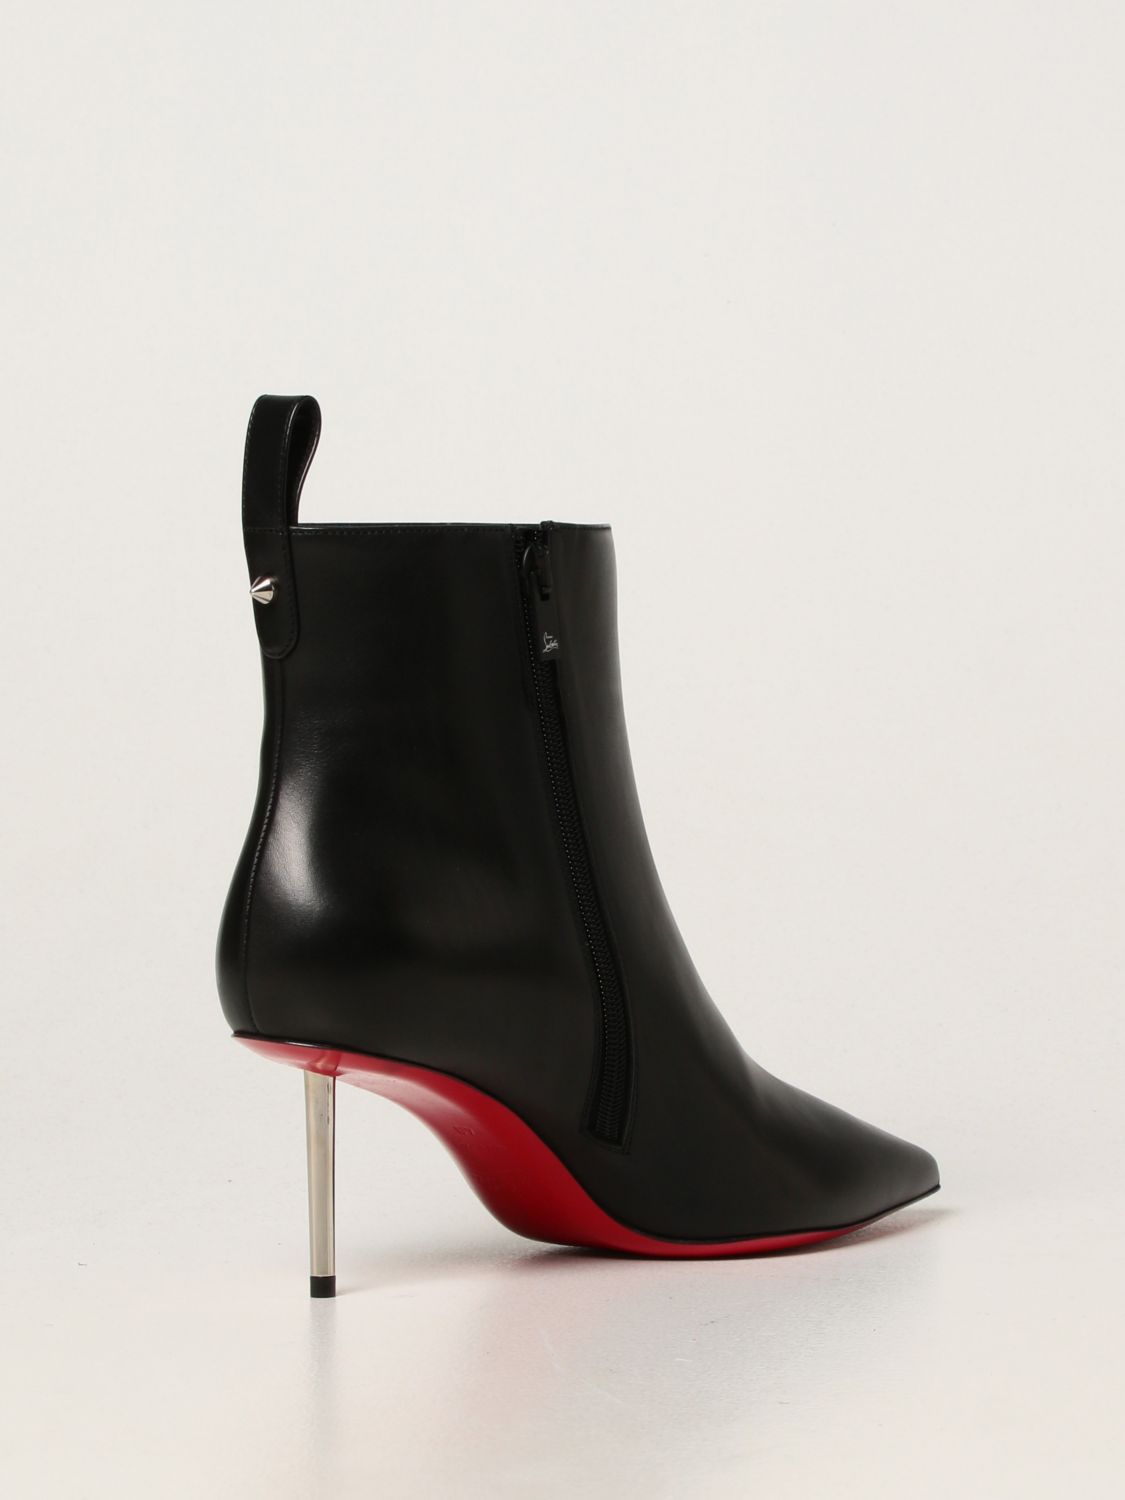 CHRISTIAN LOUBOUTIN: Epic Booty ankle boots leather | Heeled Booties Christian Louboutin Women Black | Heeled Booties Christian Louboutin 3210855 GIGLIO.COM